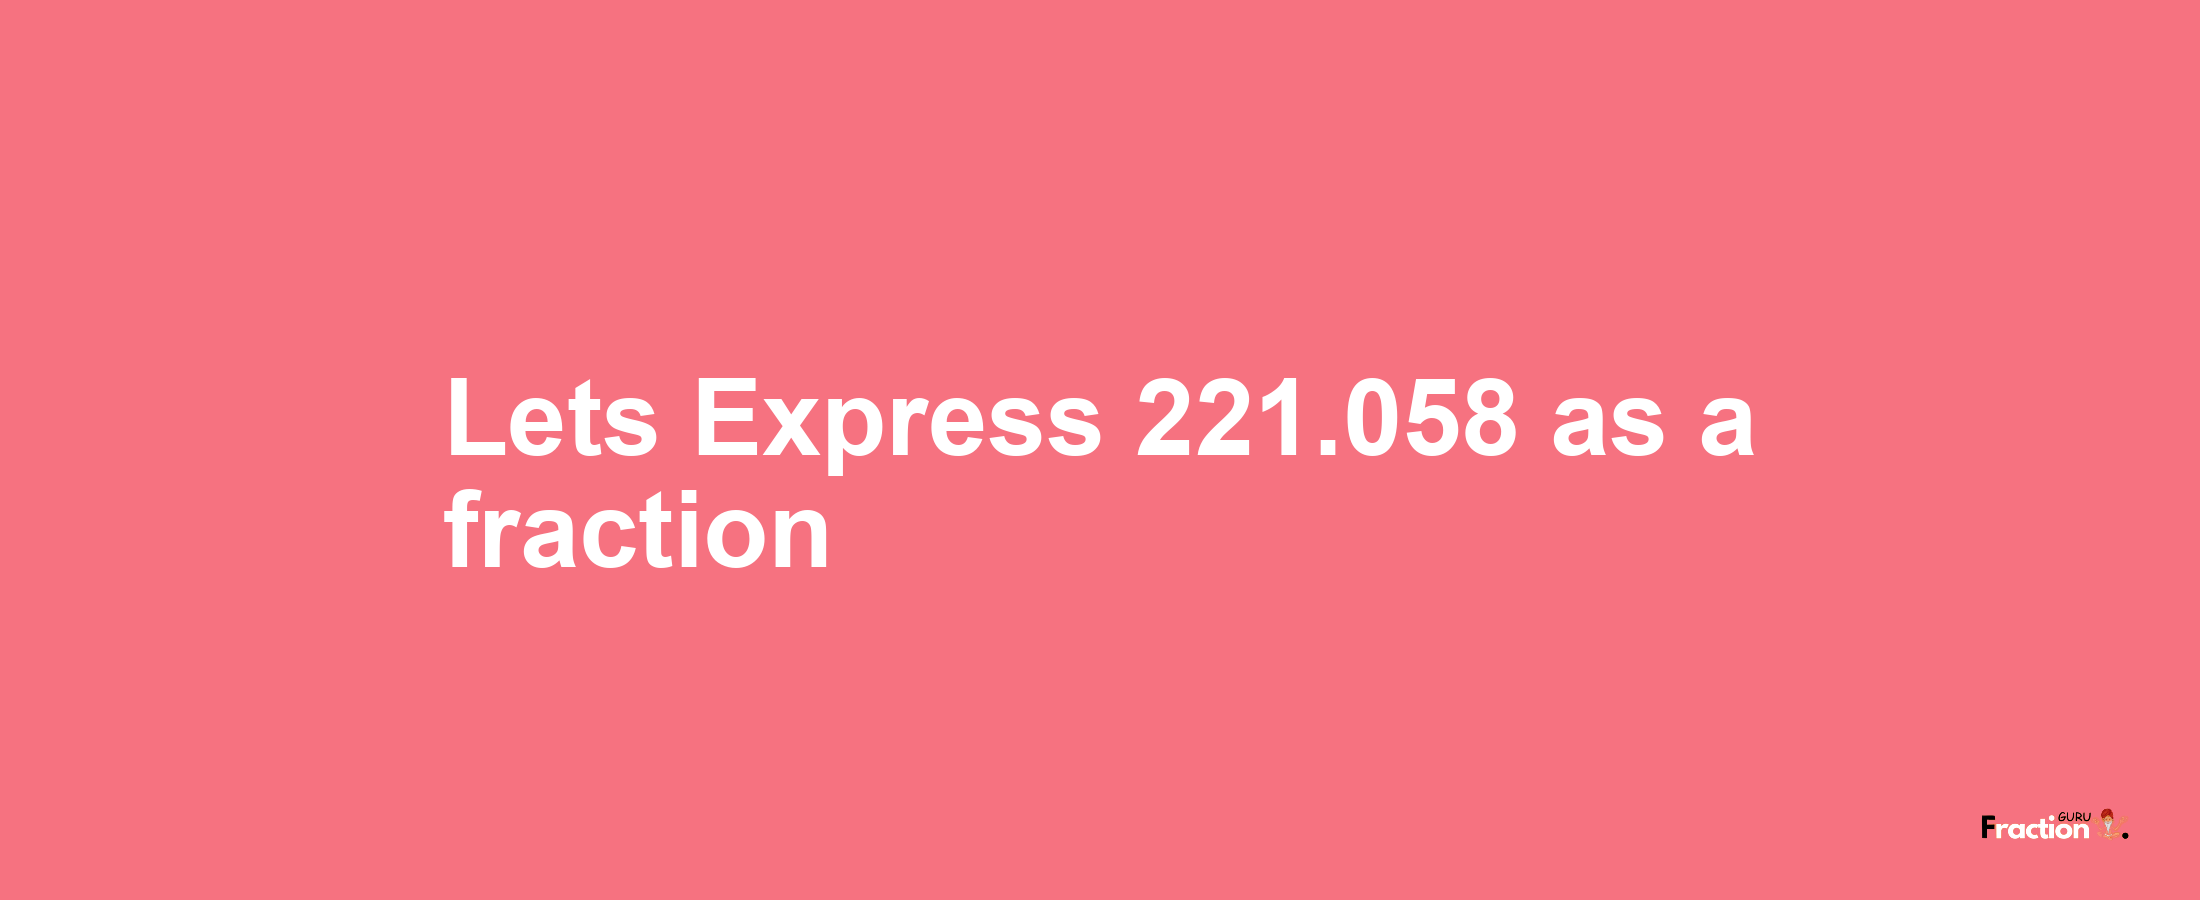 Lets Express 221.058 as afraction